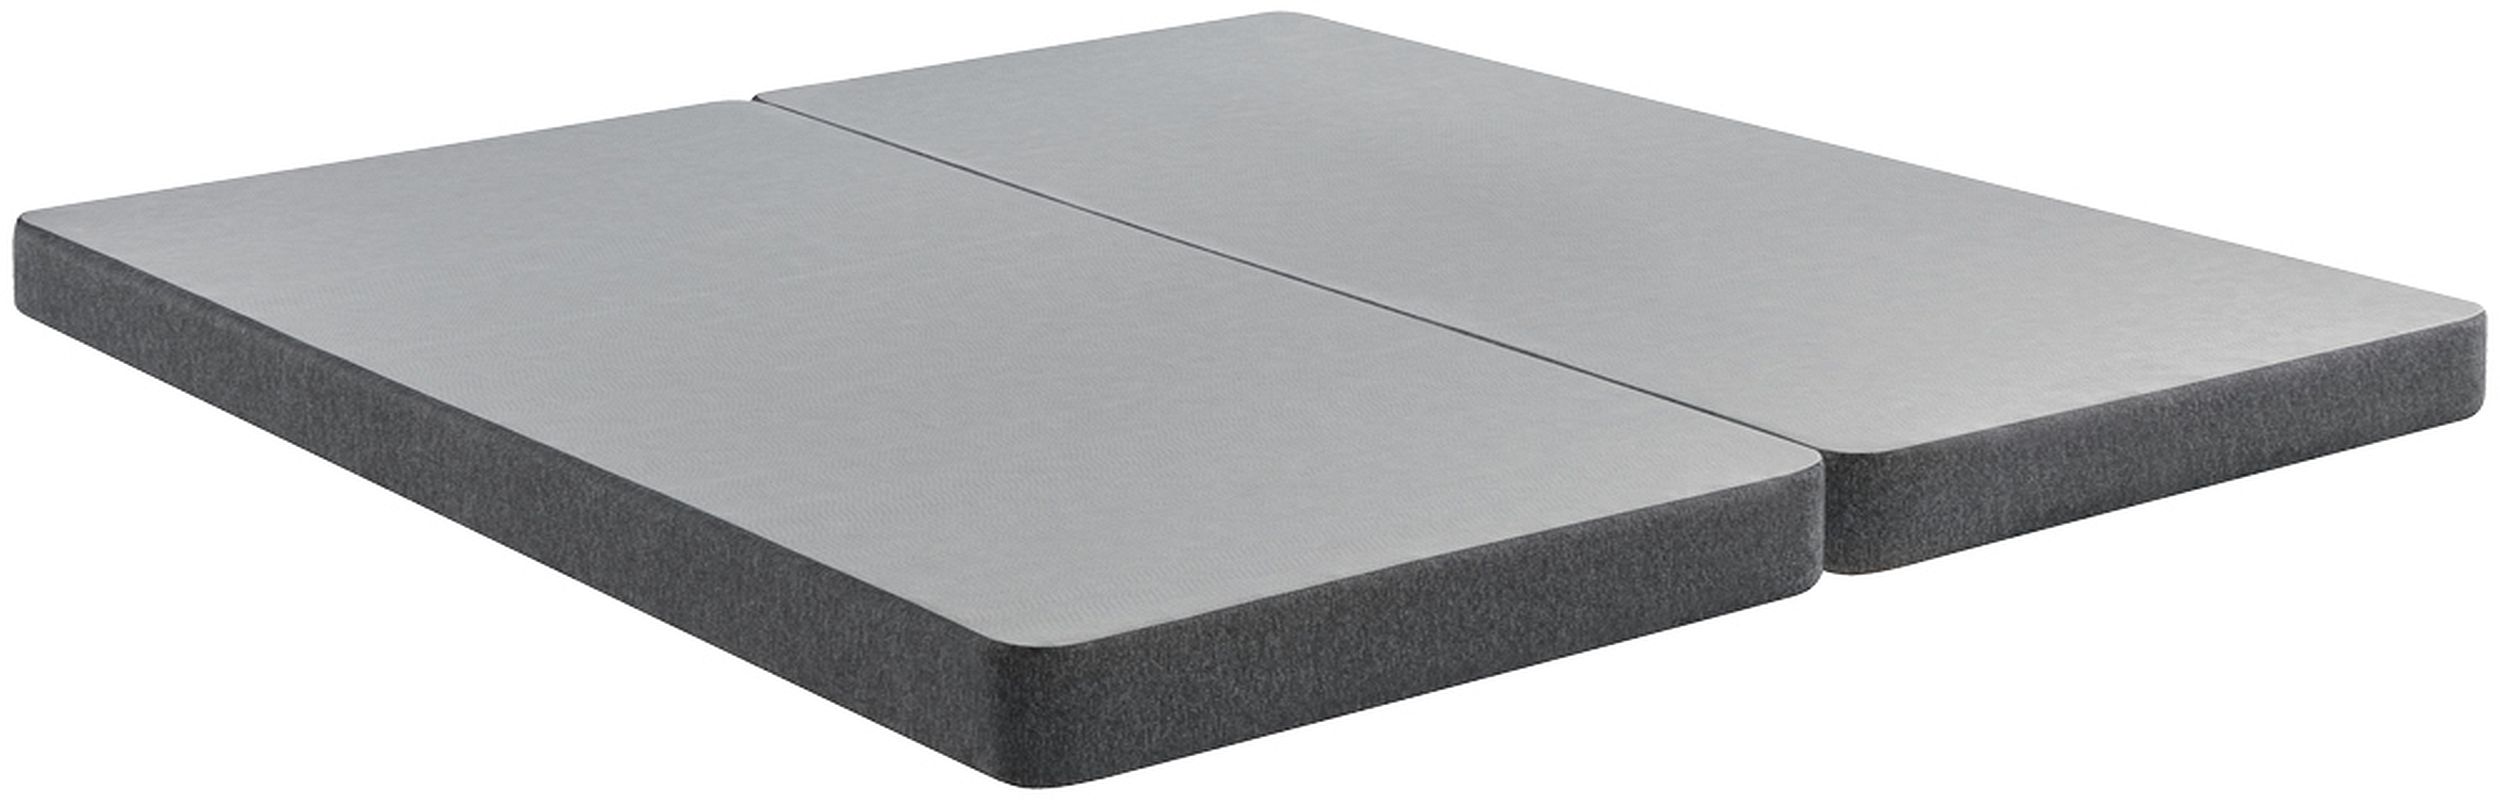 Beautyrest BRS Boxspring Cal King- 2 needed for Cal King